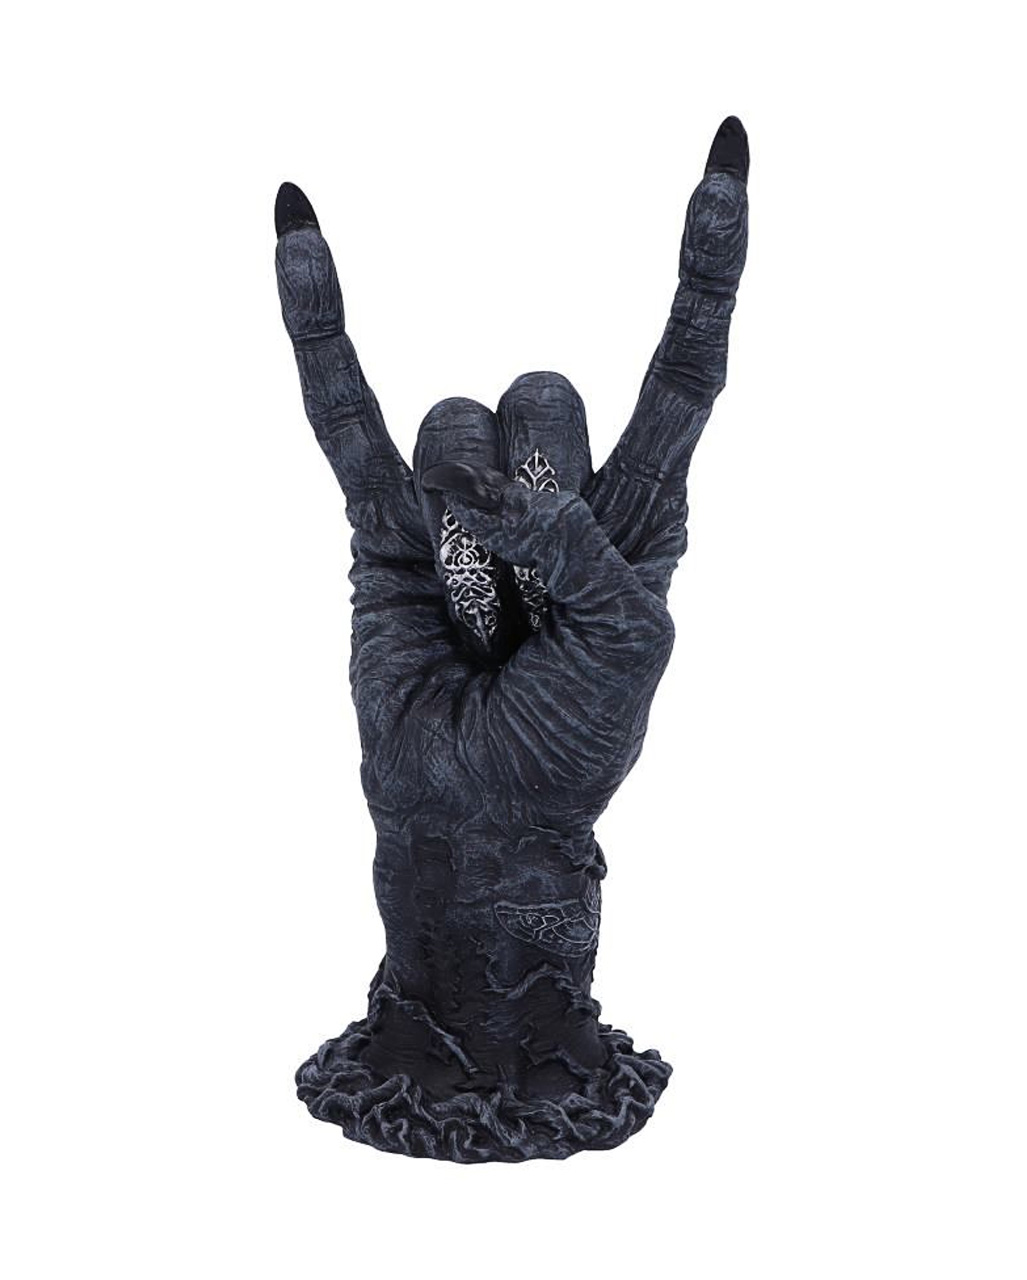 Baphomet's Hand as Gothic & Occult decoration